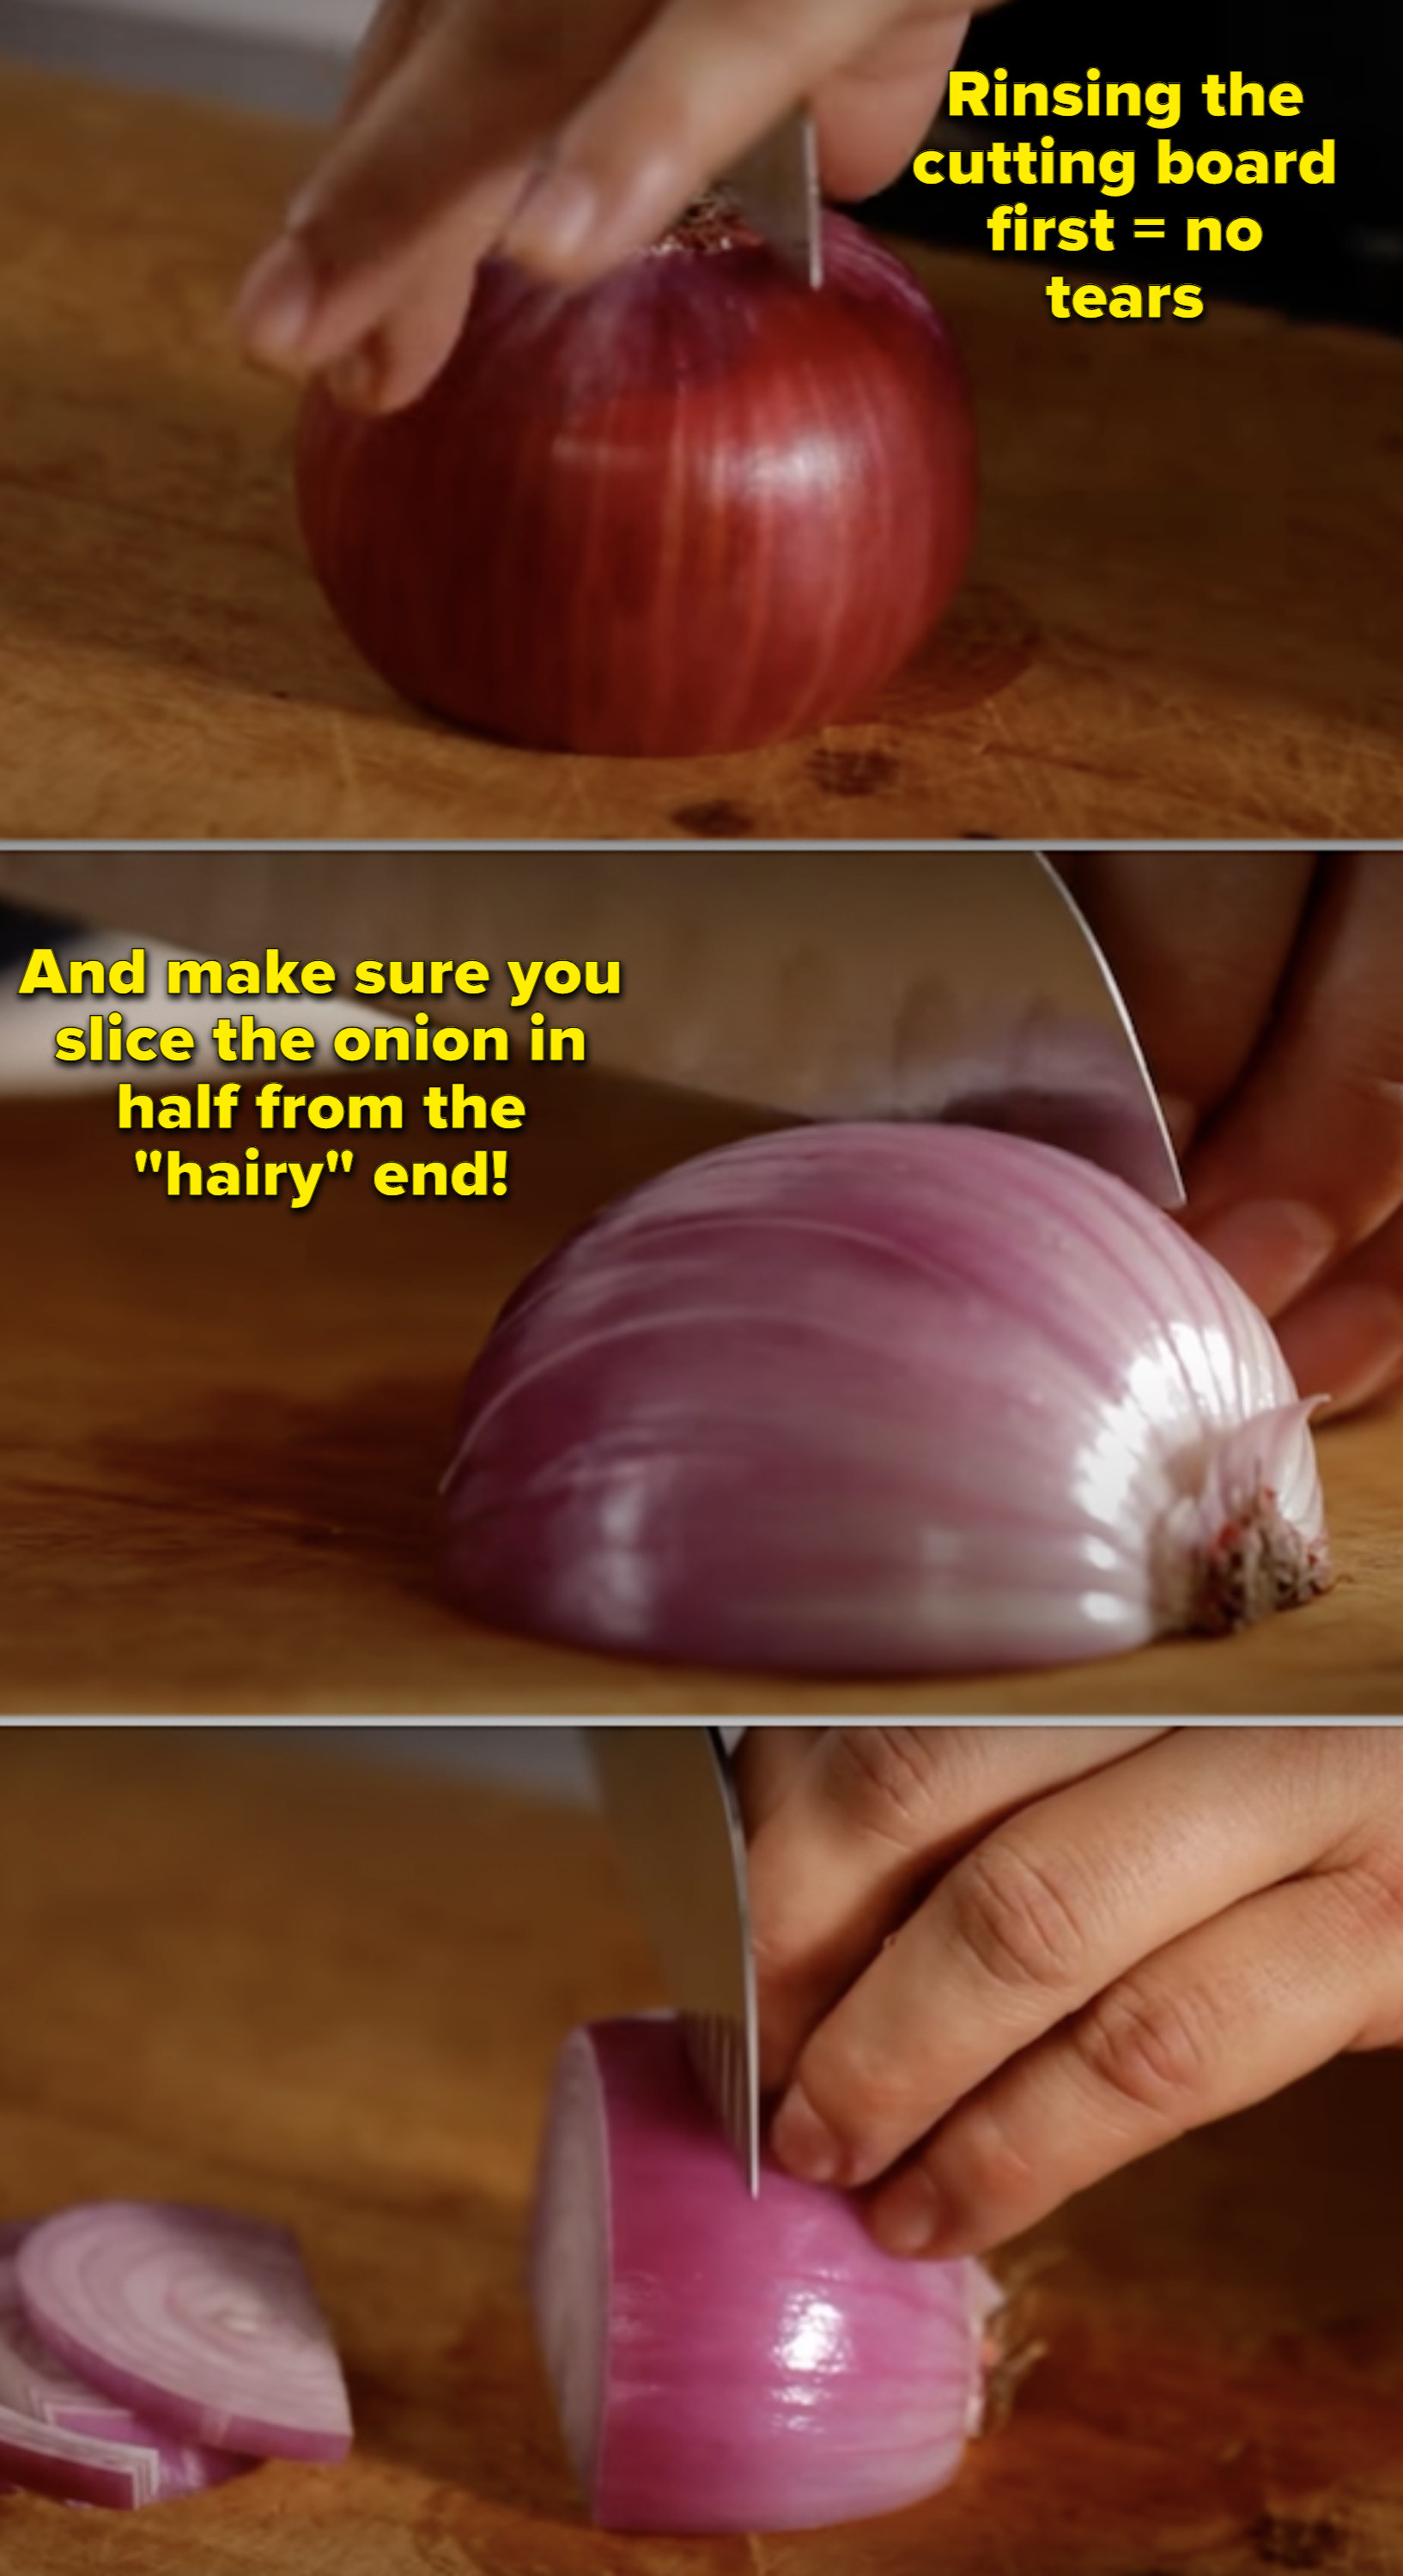 Someone cutting an onion with recommendation to rinse the cutting board first and cut in half from the &quot;hairy&quot; end